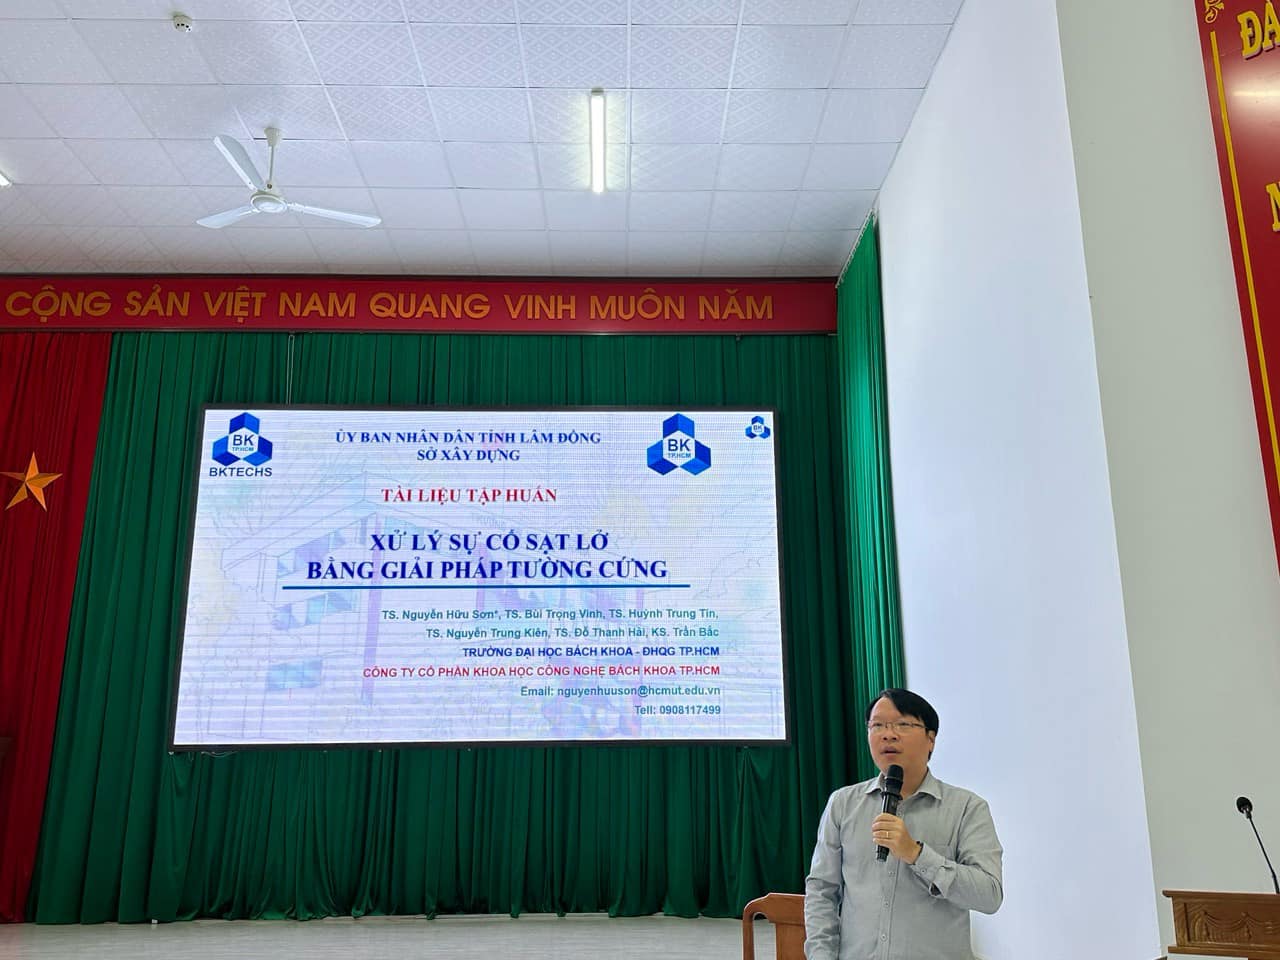 Conference on training for licensing work, structural design of slope structures, and retaining walls in Lâm Đồng province.